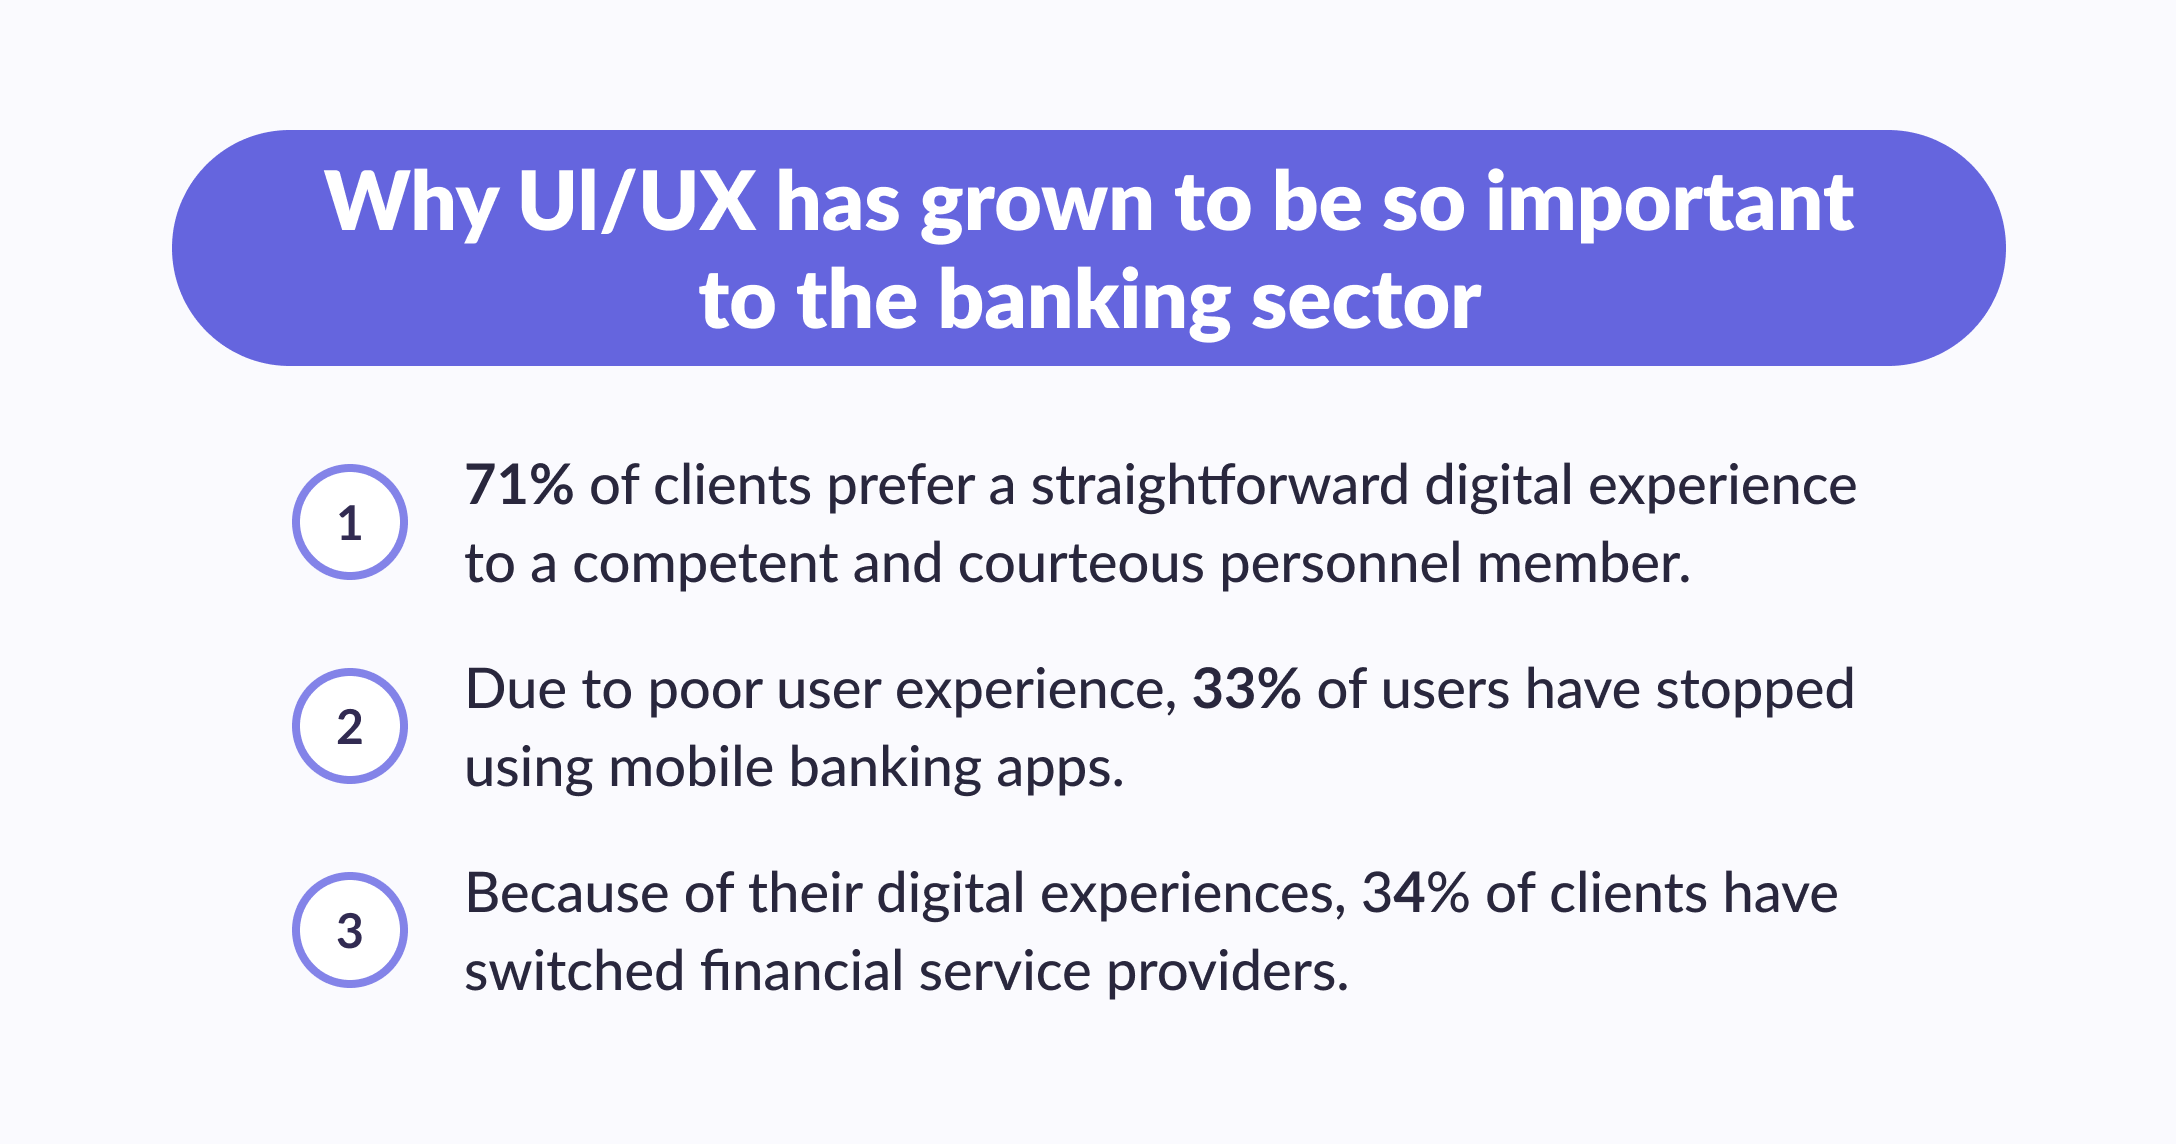 Why UI/UX is important to the banking sector